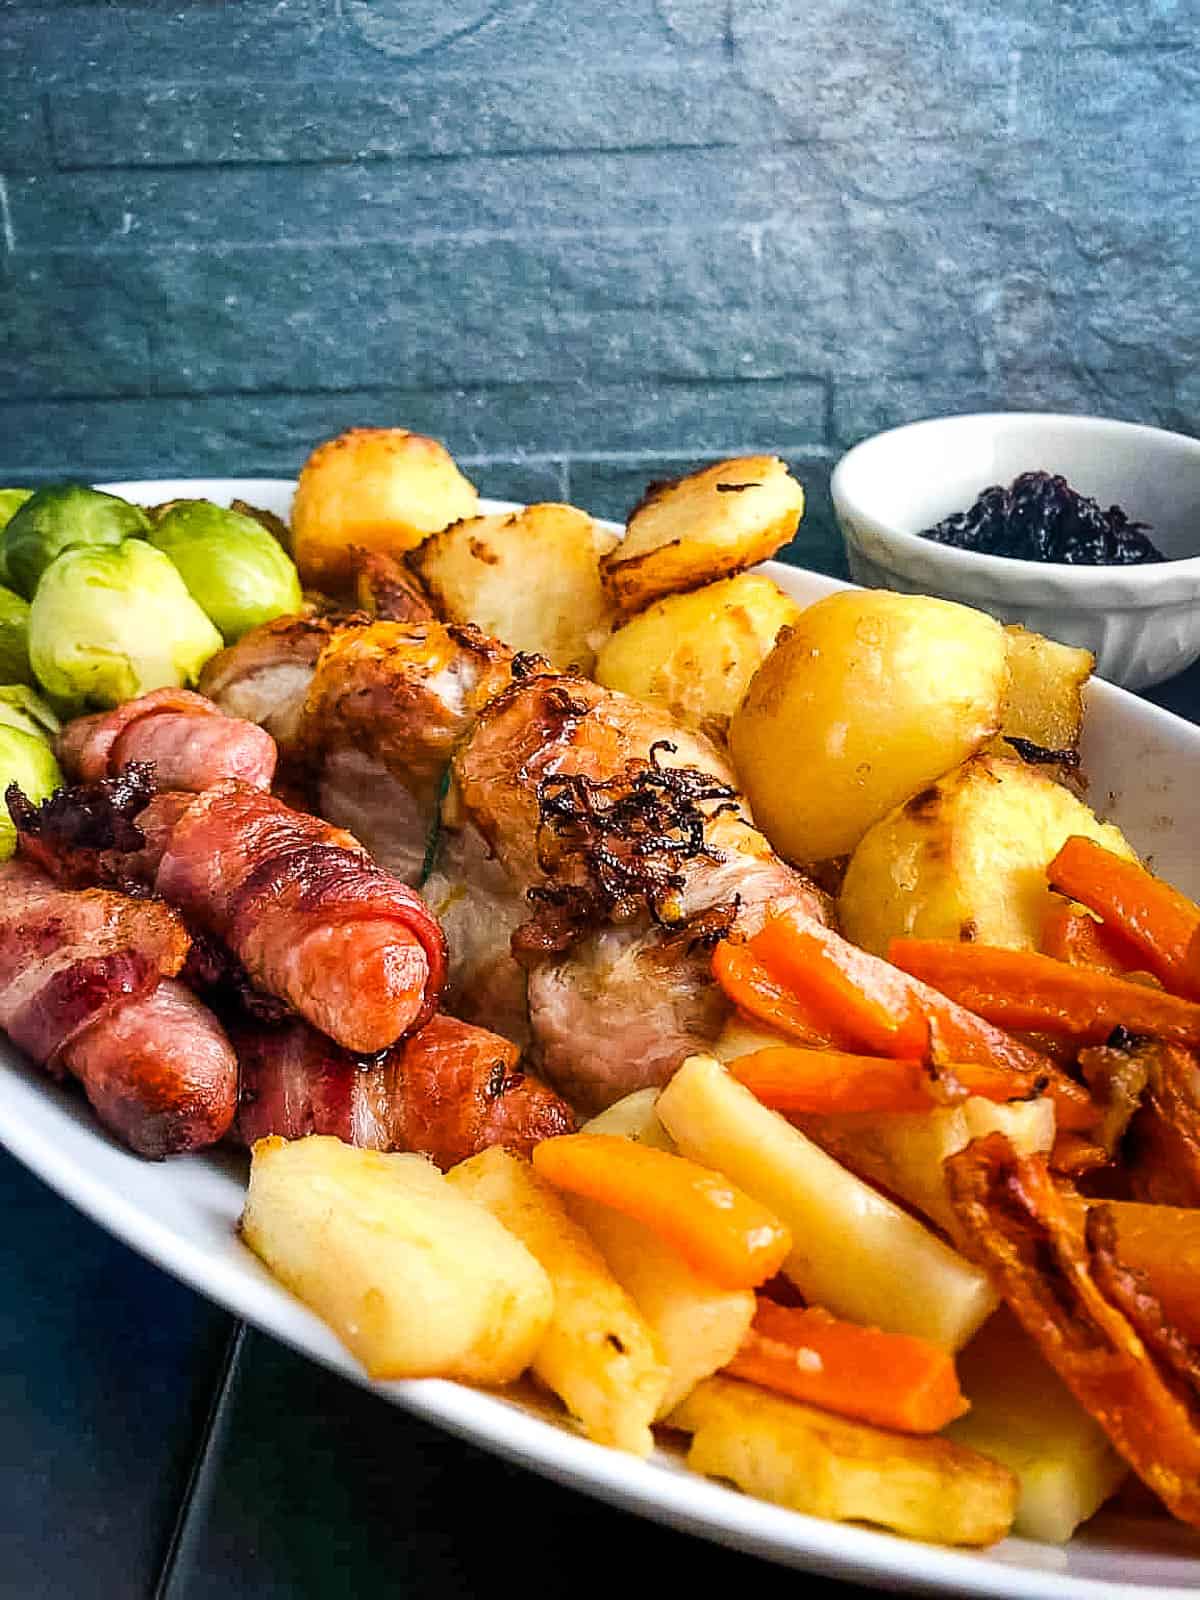 turkey breast pigs in blankets roast potatoes carrots parsnips sprouts on plate with side of cranberry sauce